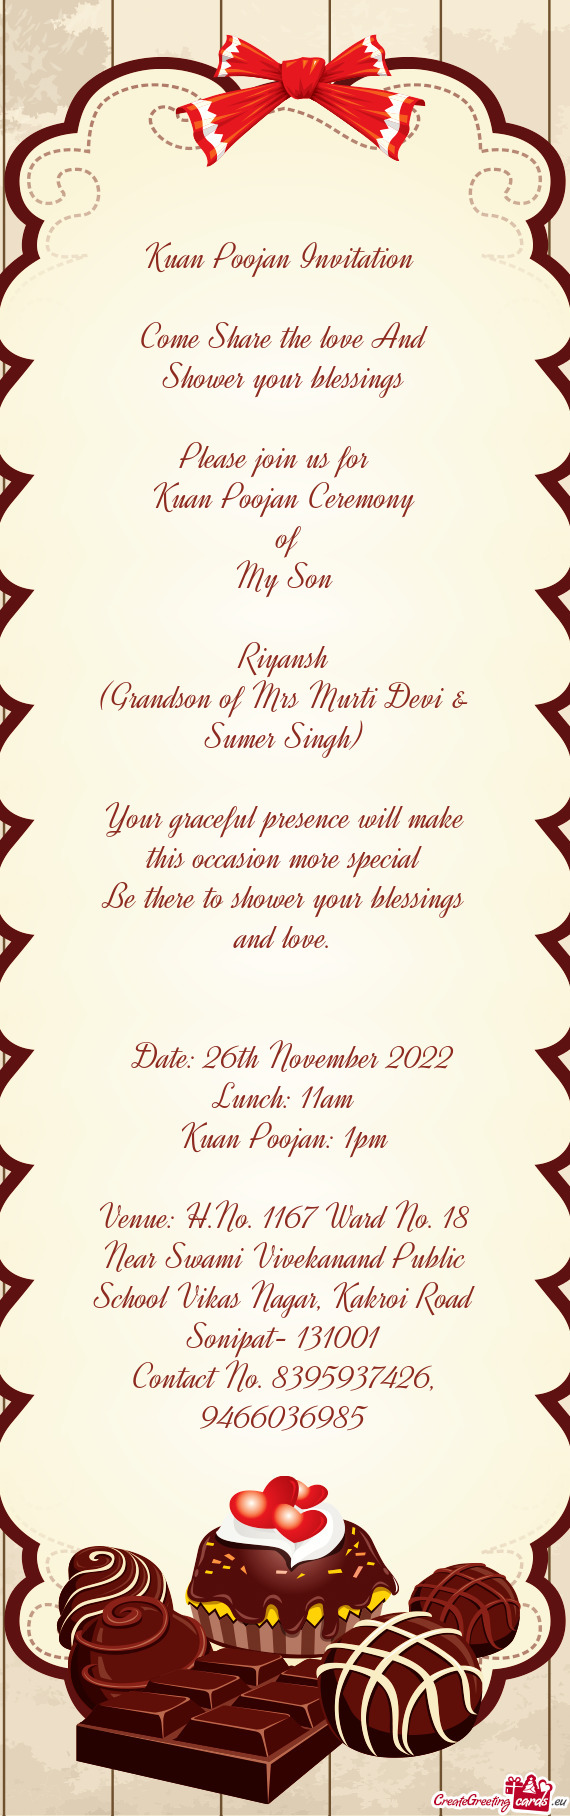 Kuan Poojan Invitation  Come Share the love And Shower your blessings Please join us for K